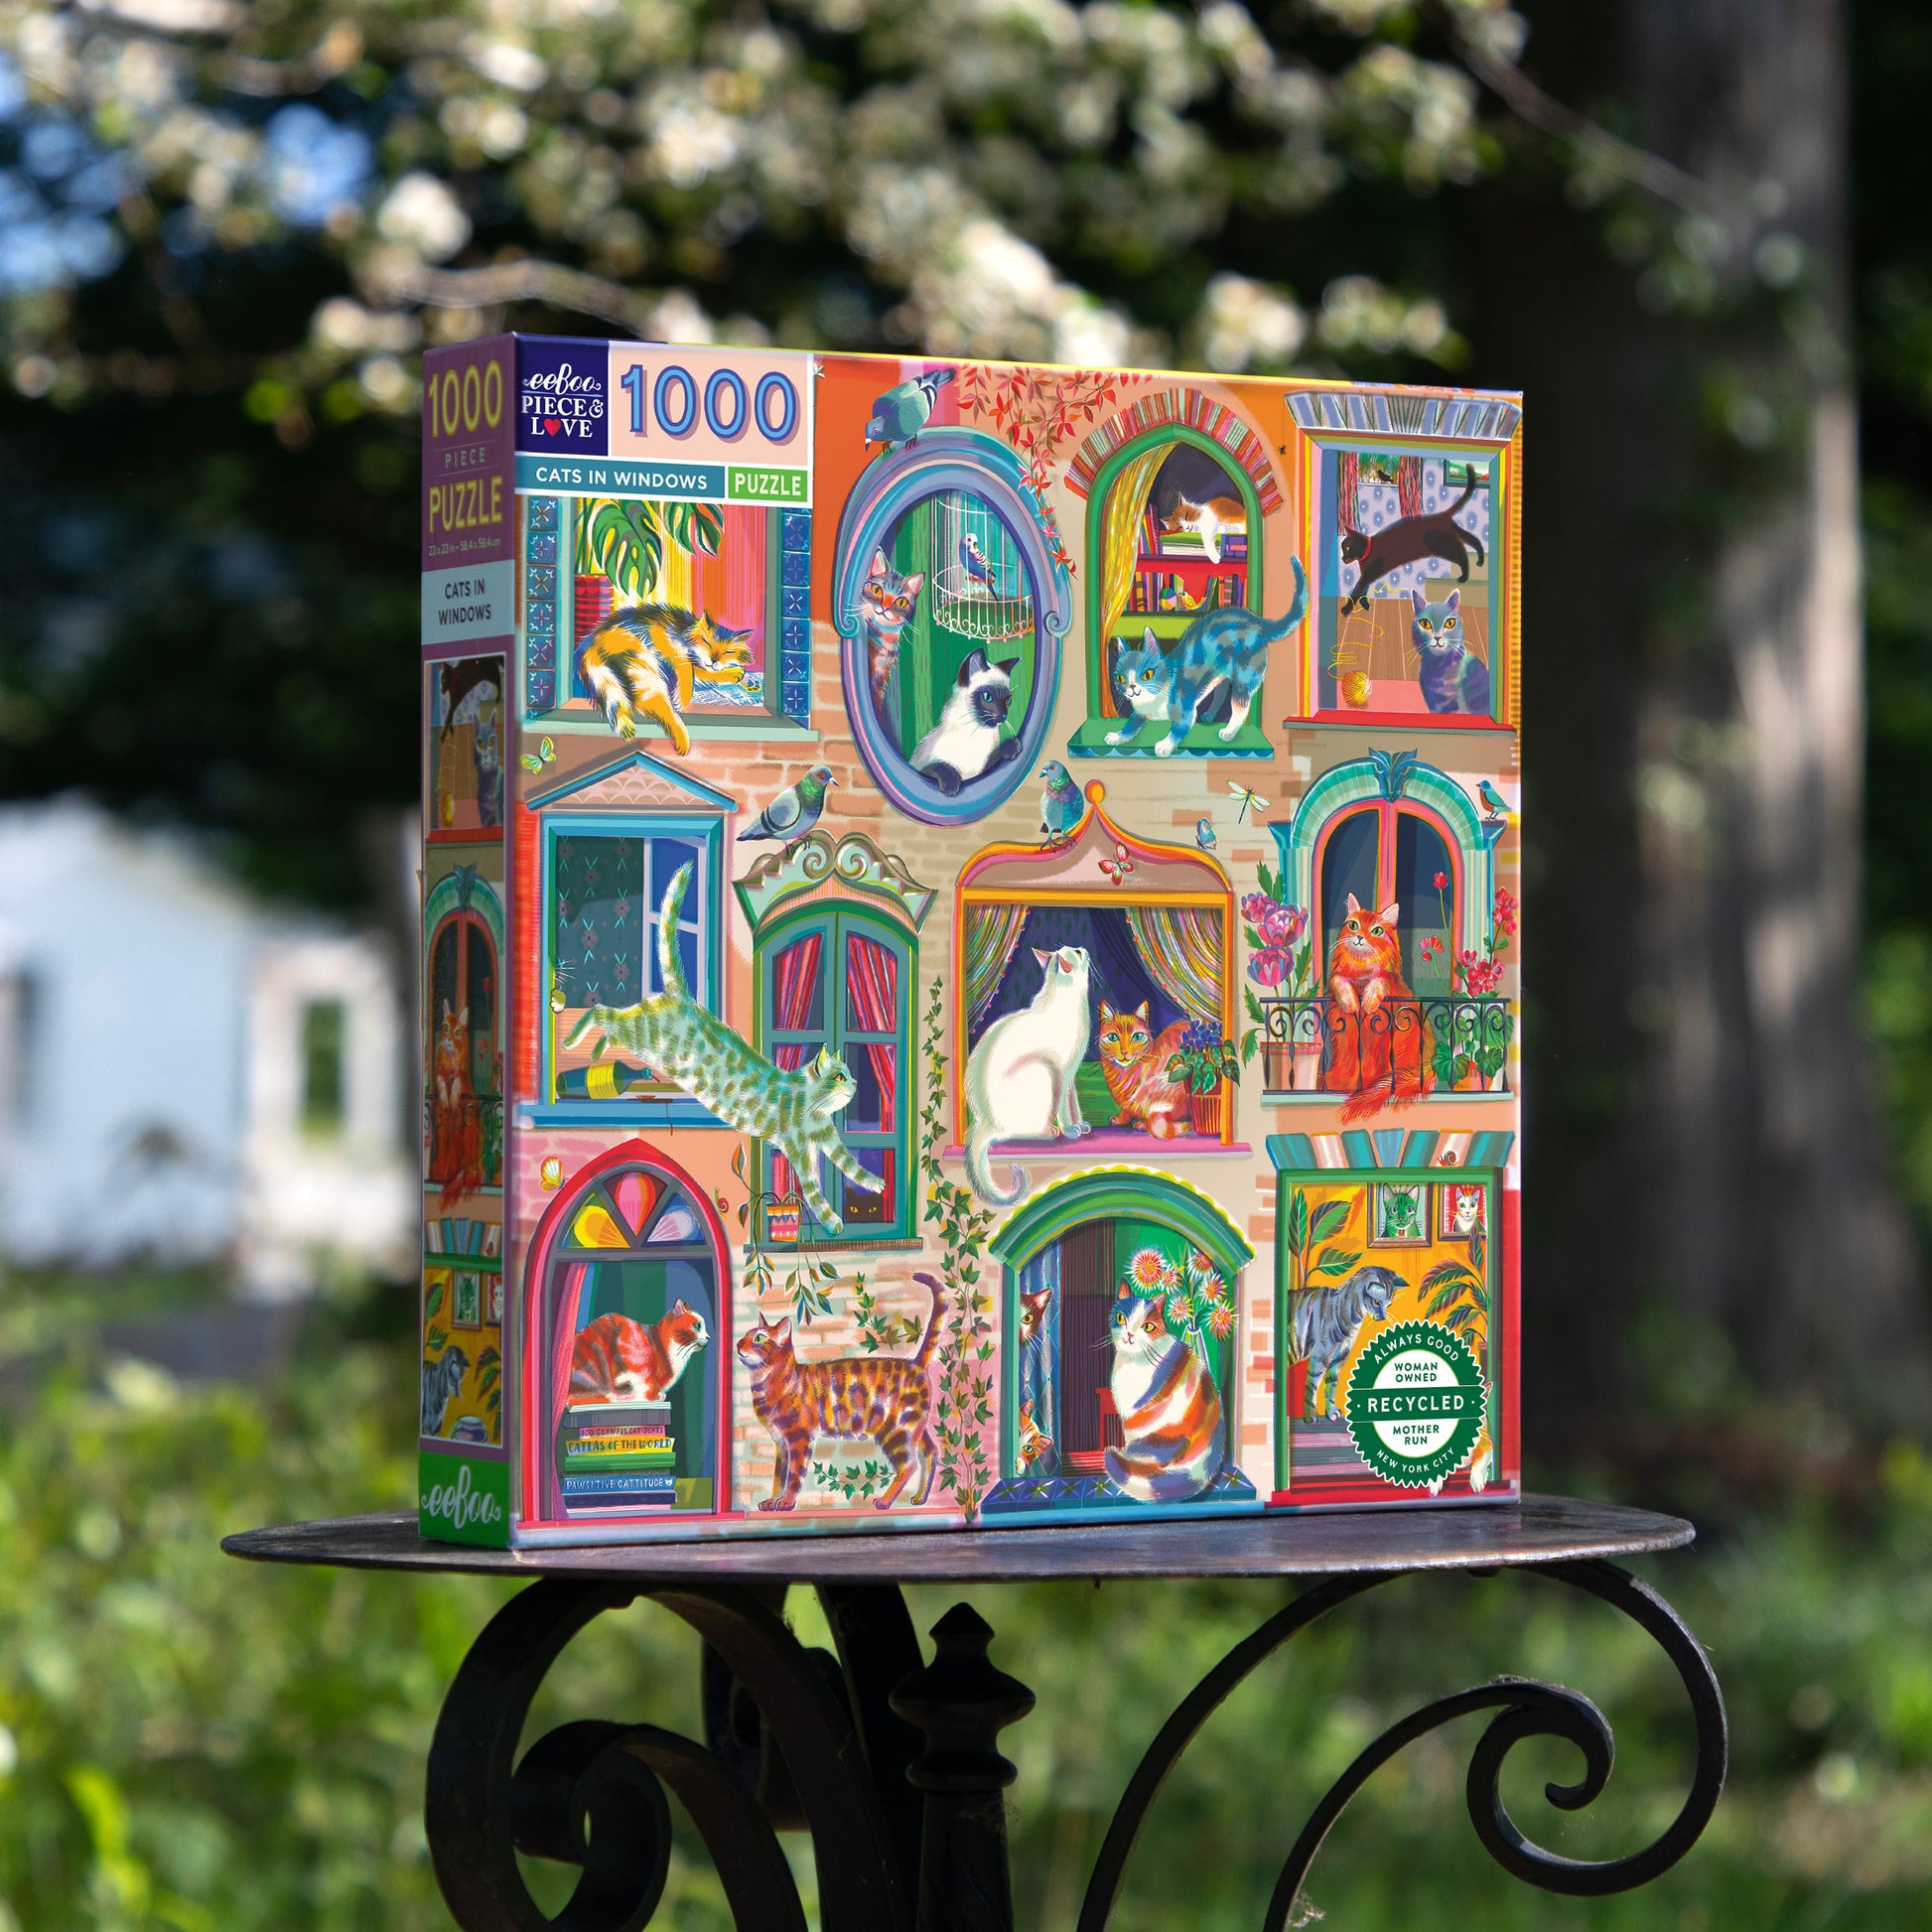 Cats in Windows 1000 Piece Jigsaw Puzzle | eeBoo Piece & Love Unique Gifts for Cat Lovers